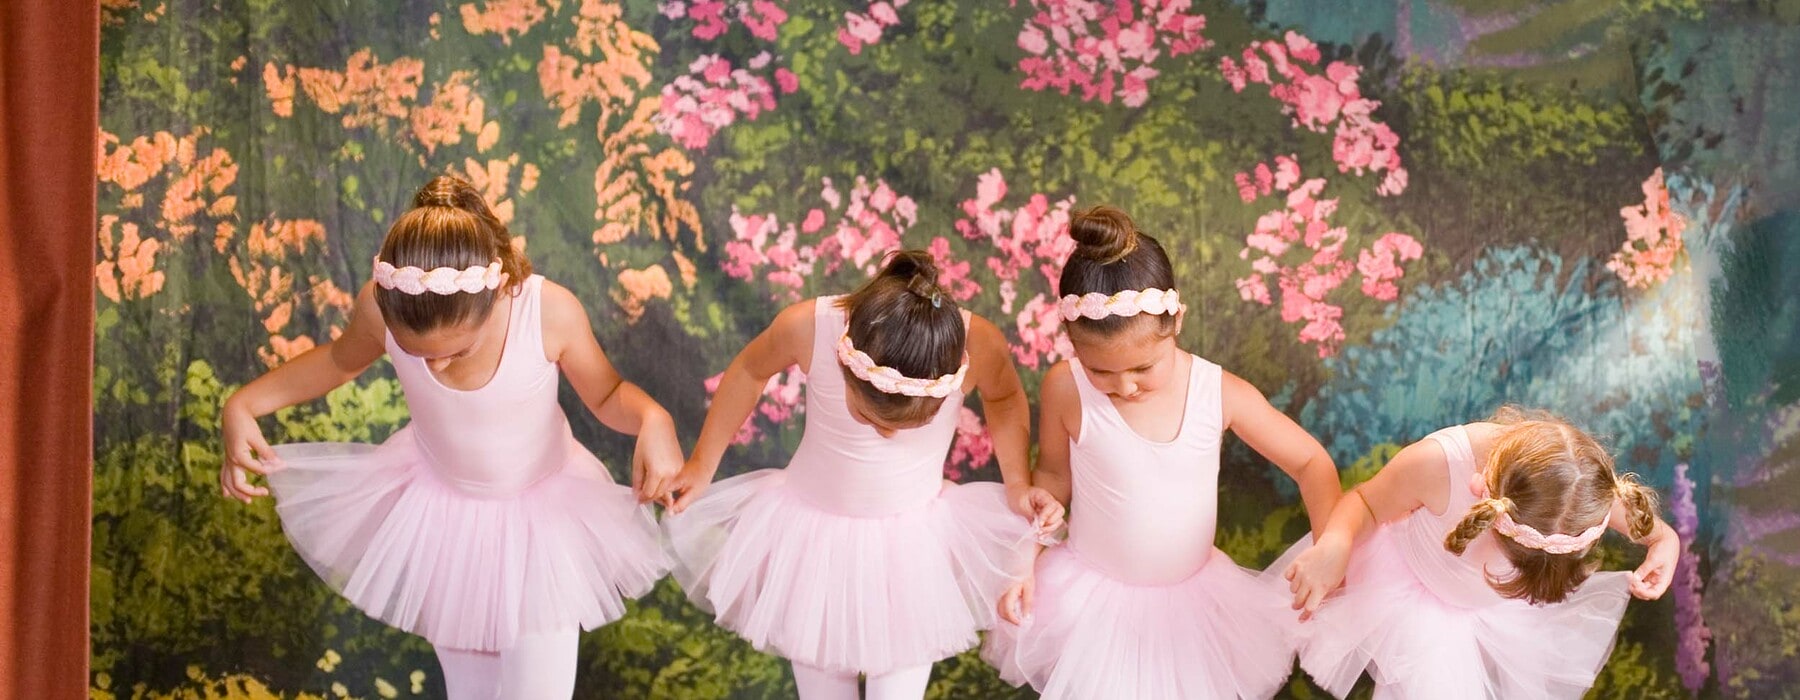 a group of little girls in pin leotards, tutus and tights and doing ballet